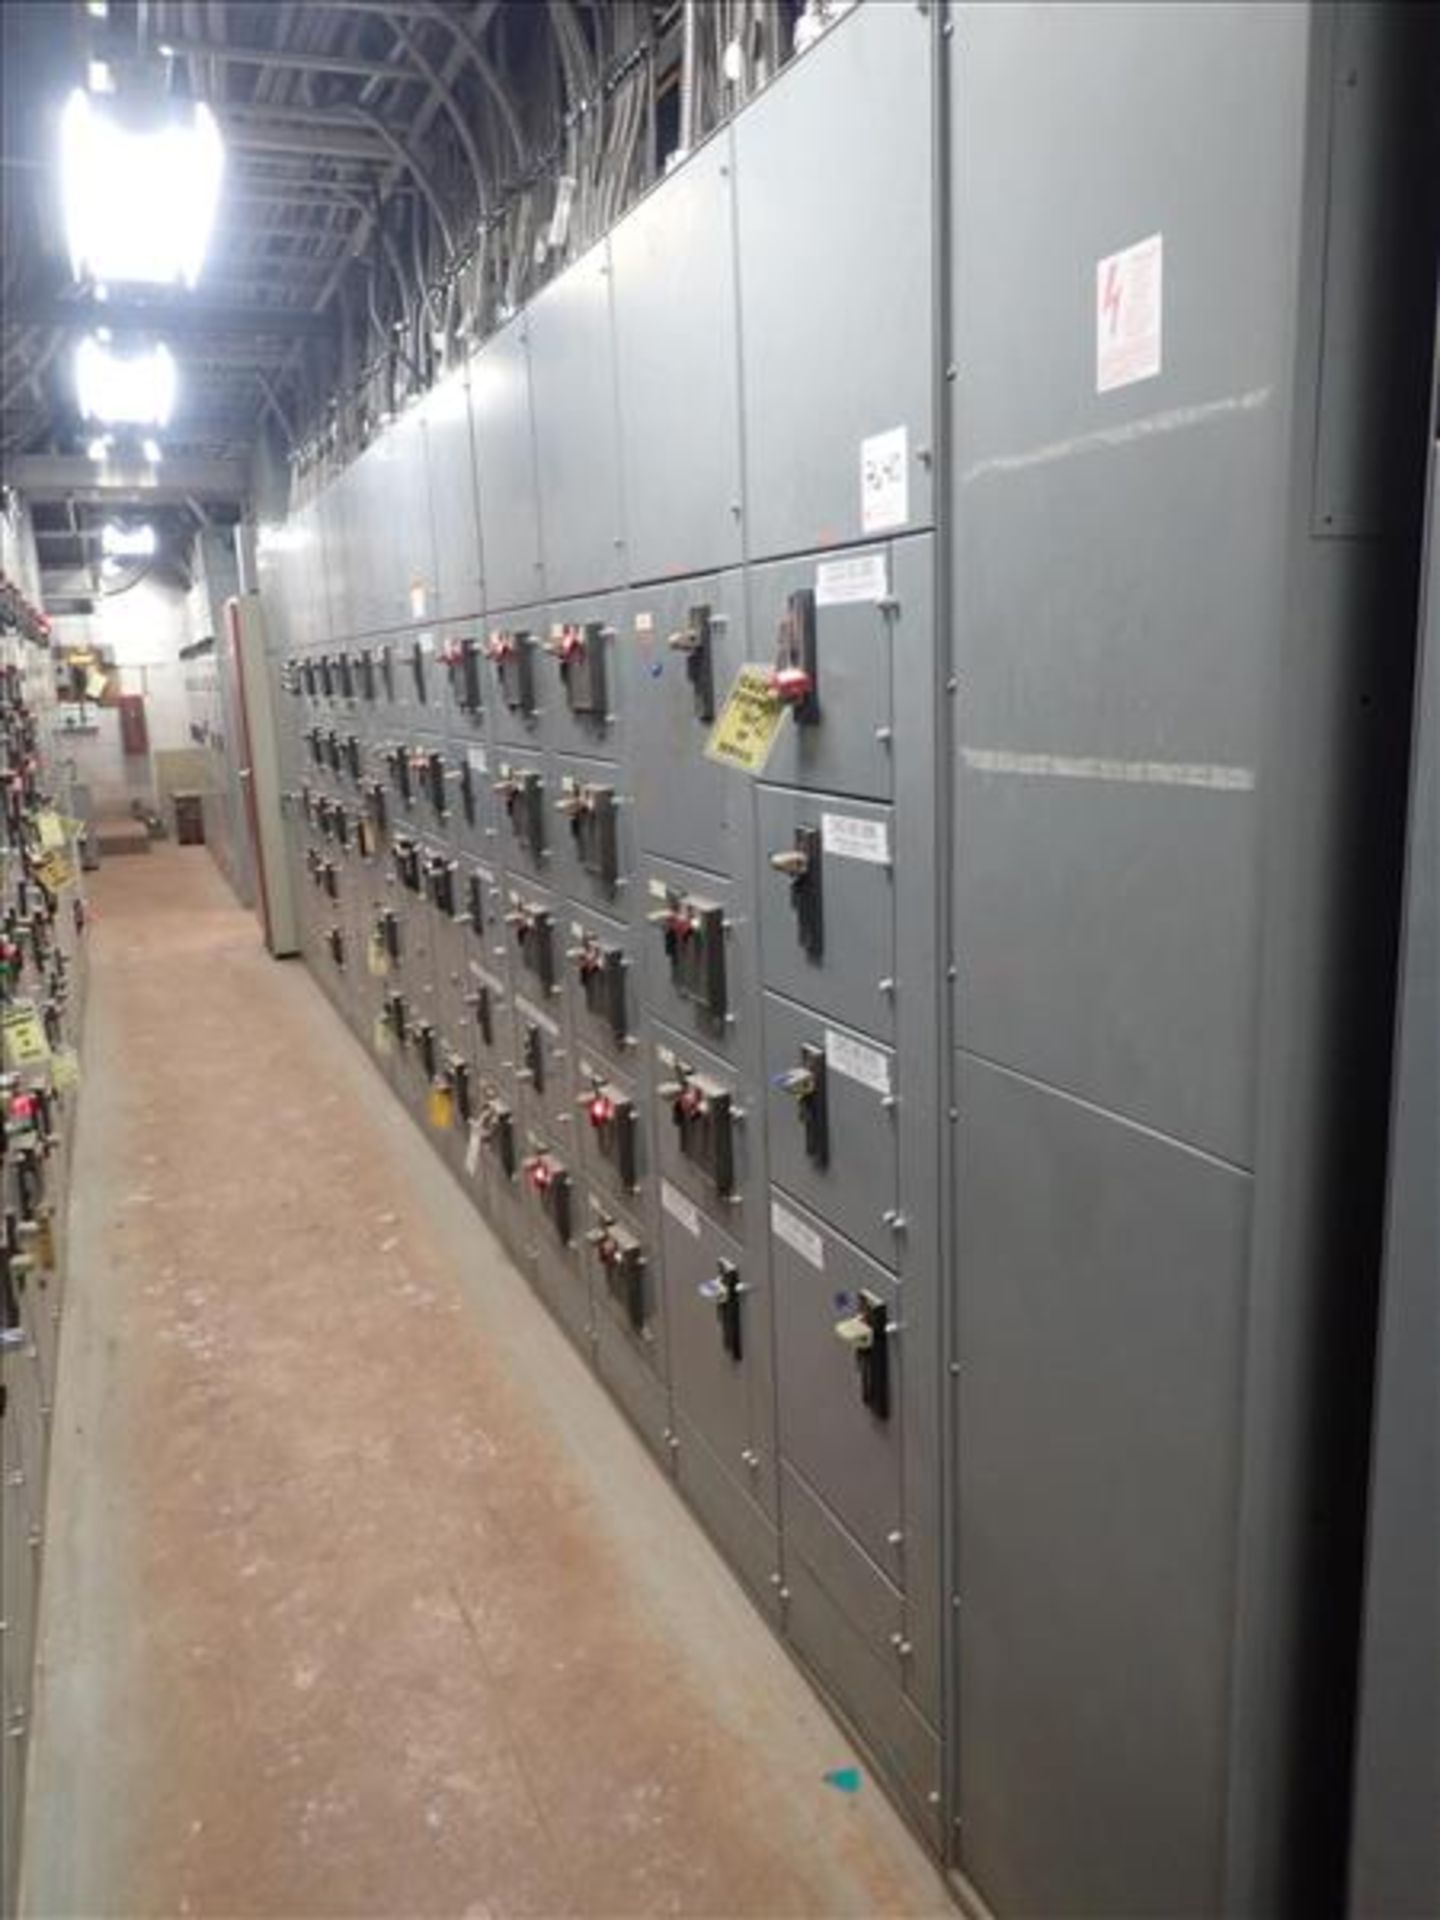 Cutler Hammer Eaton motor control center (as pictured) (Tag 7640 Loc ZPL Plant/Main MCC)